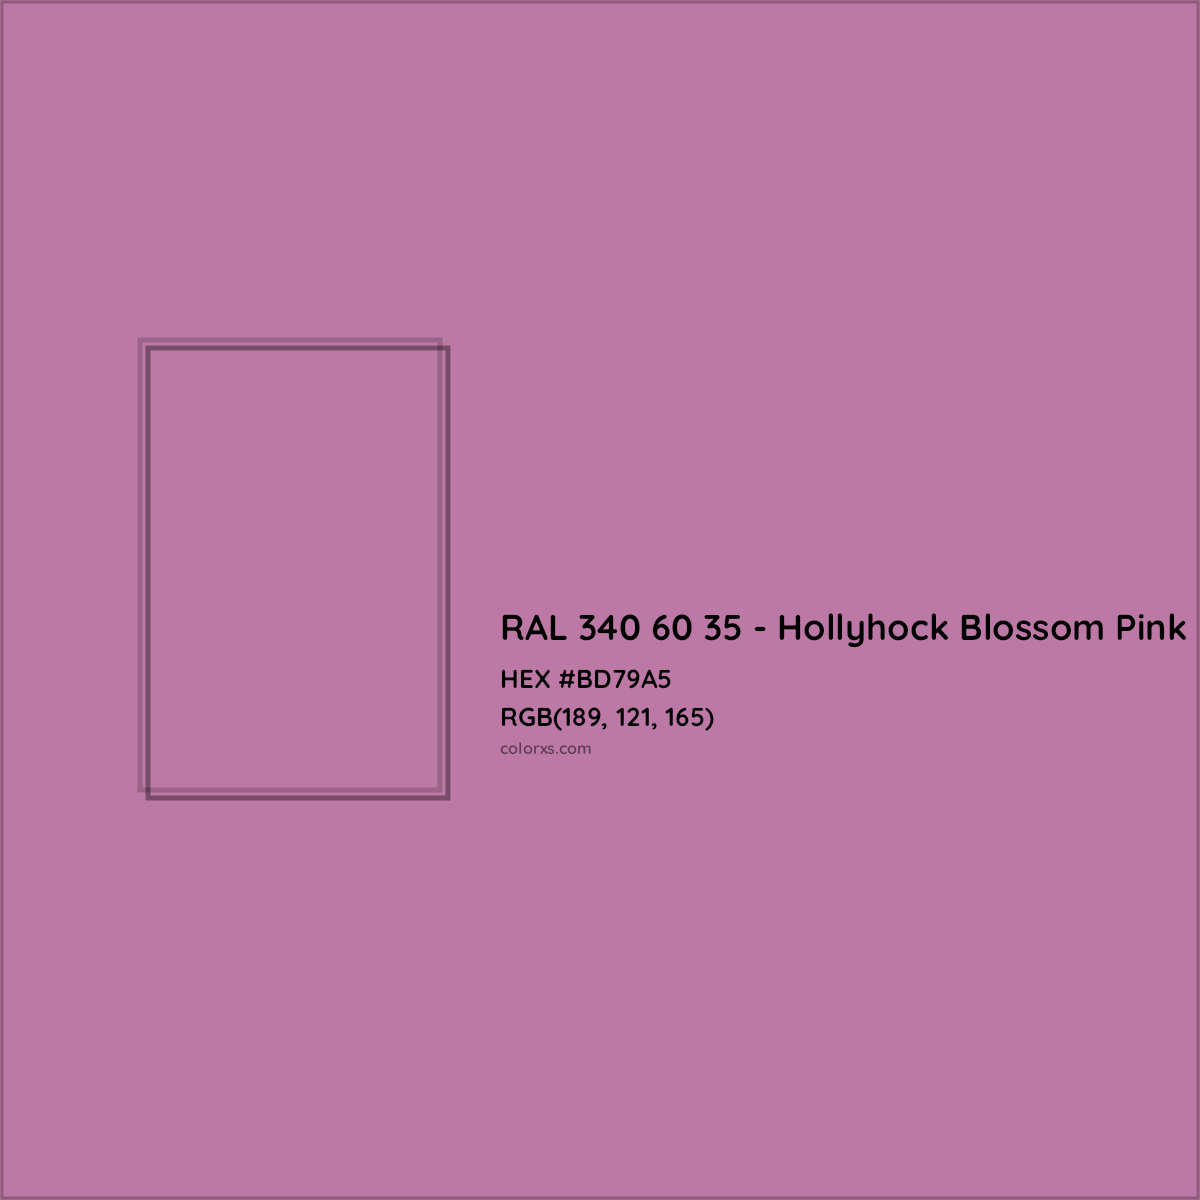 HEX #BD79A5 RAL 340 60 35 - Hollyhock Blossom Pink CMS RAL Design - Color Code